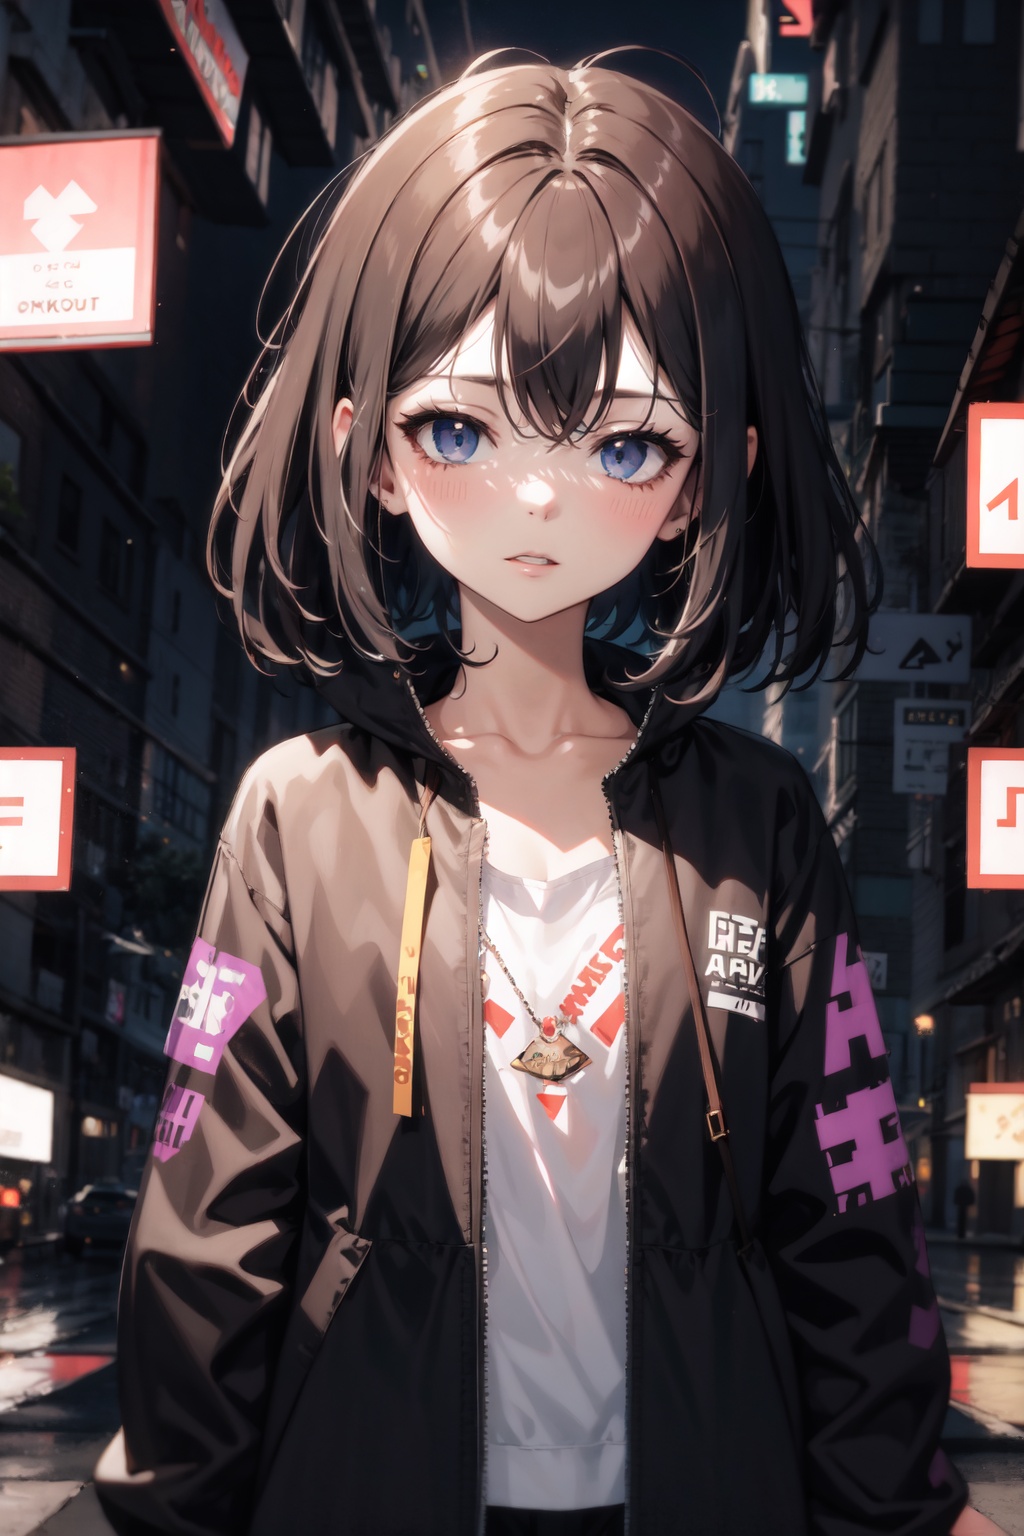 {{cute anime face}}, (best quality), (ultra-detailed) , (best illustration), (extremely delicate and beautiful},{album cover}, album, album description, {error}, {{glitch lump}on face},(glitch art:1.5), {Pixilation on face},Double exposure, {Chromatic Aberration}, Light leaks, Noise and grain, Color degradation, Glitch lettering,design,1 girl, art, abstract art, (flat_chest, short red hair, short wavy hair,floating black jacket, white school uniform, white beret,bowknot over white beret , floating black feathers:0.5), geometry, clear lines, squares, bright, limited palette